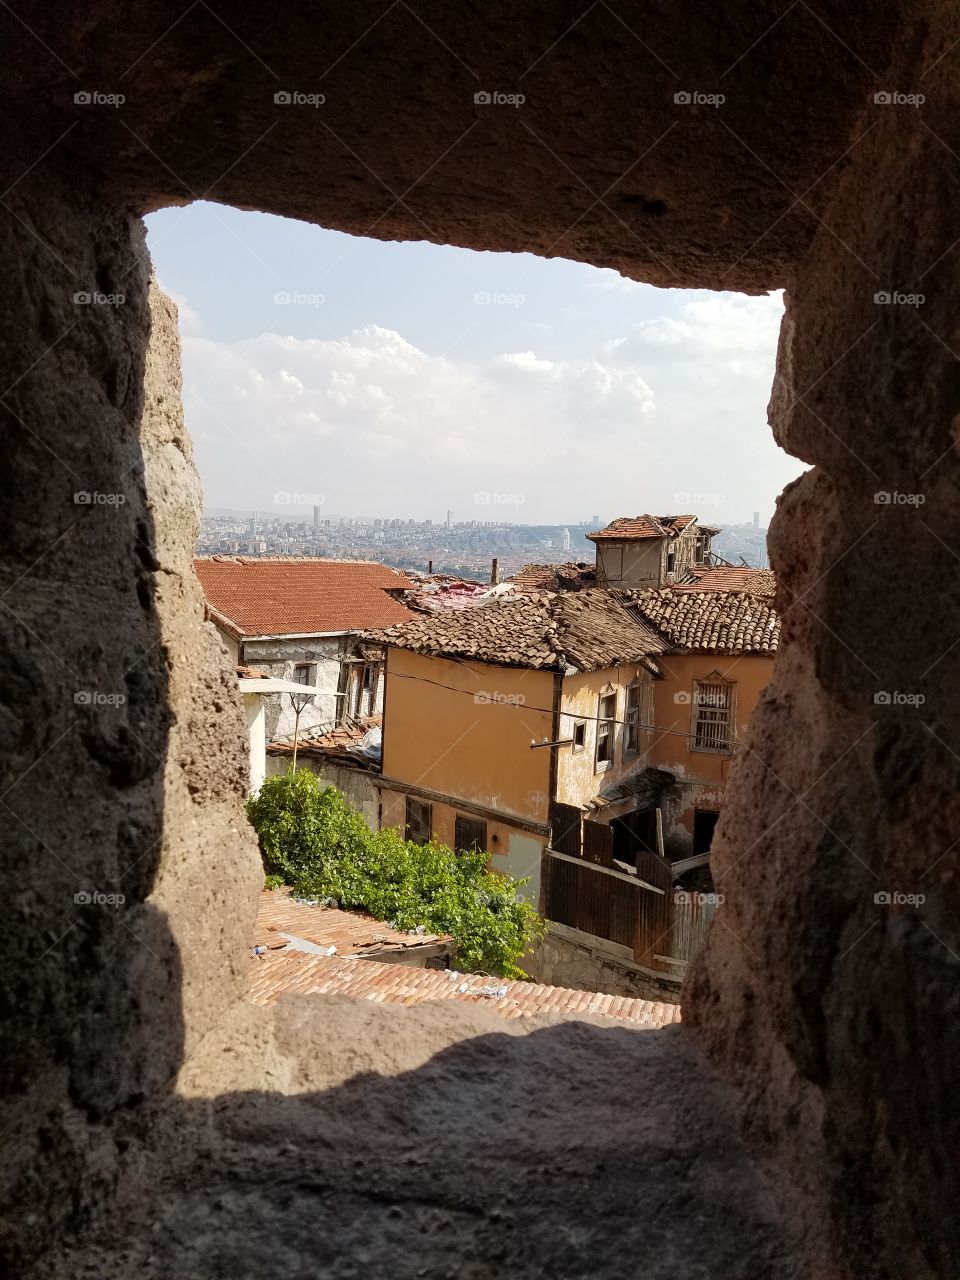 view from a window in the ankara castle in Turkey overlooking the city